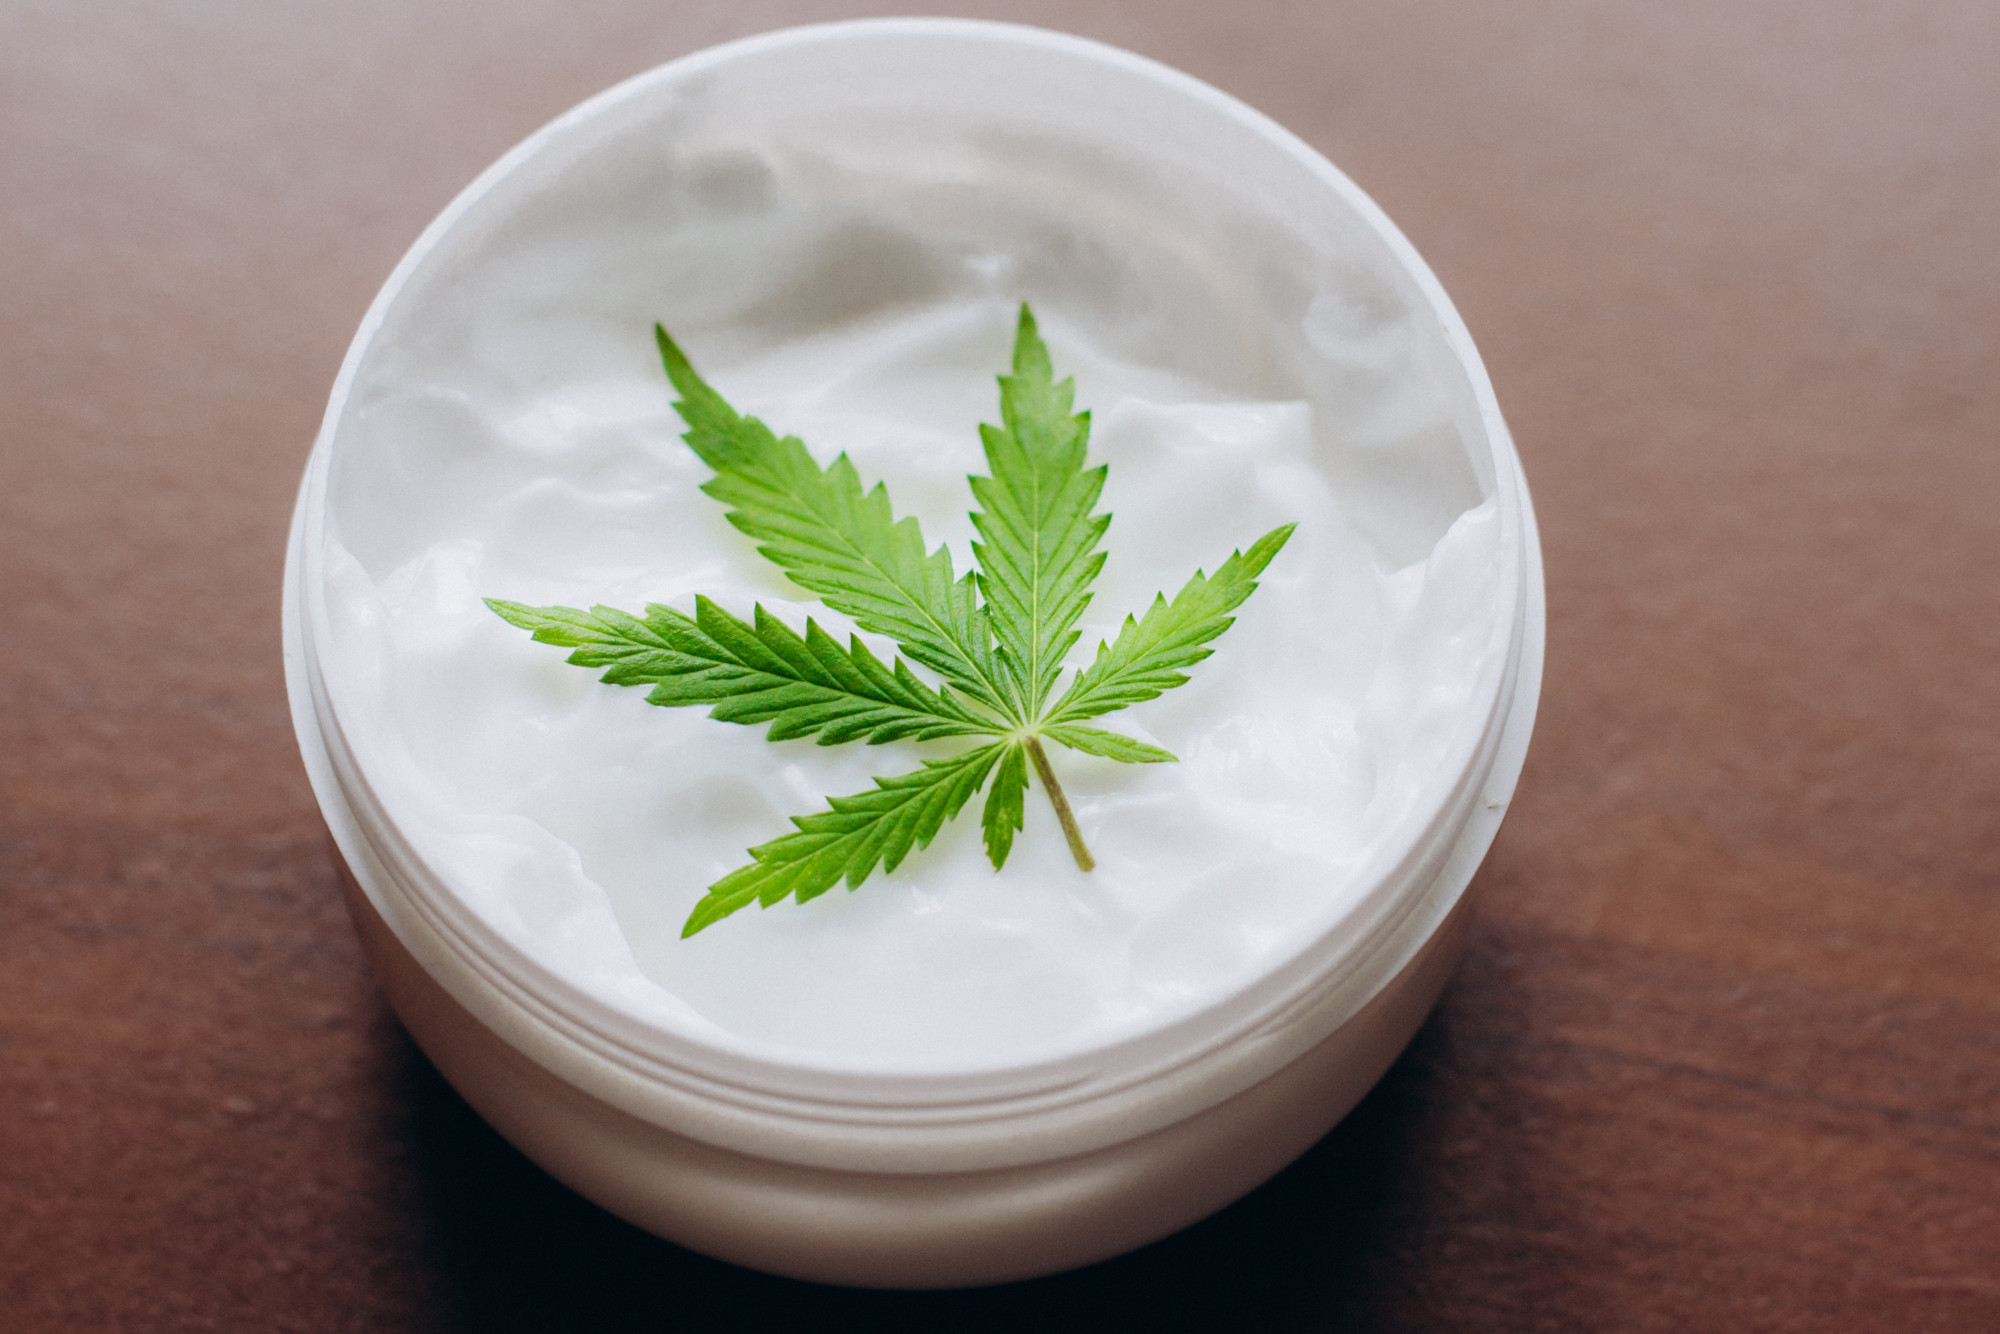 Does CBD Cream Work for Pain?